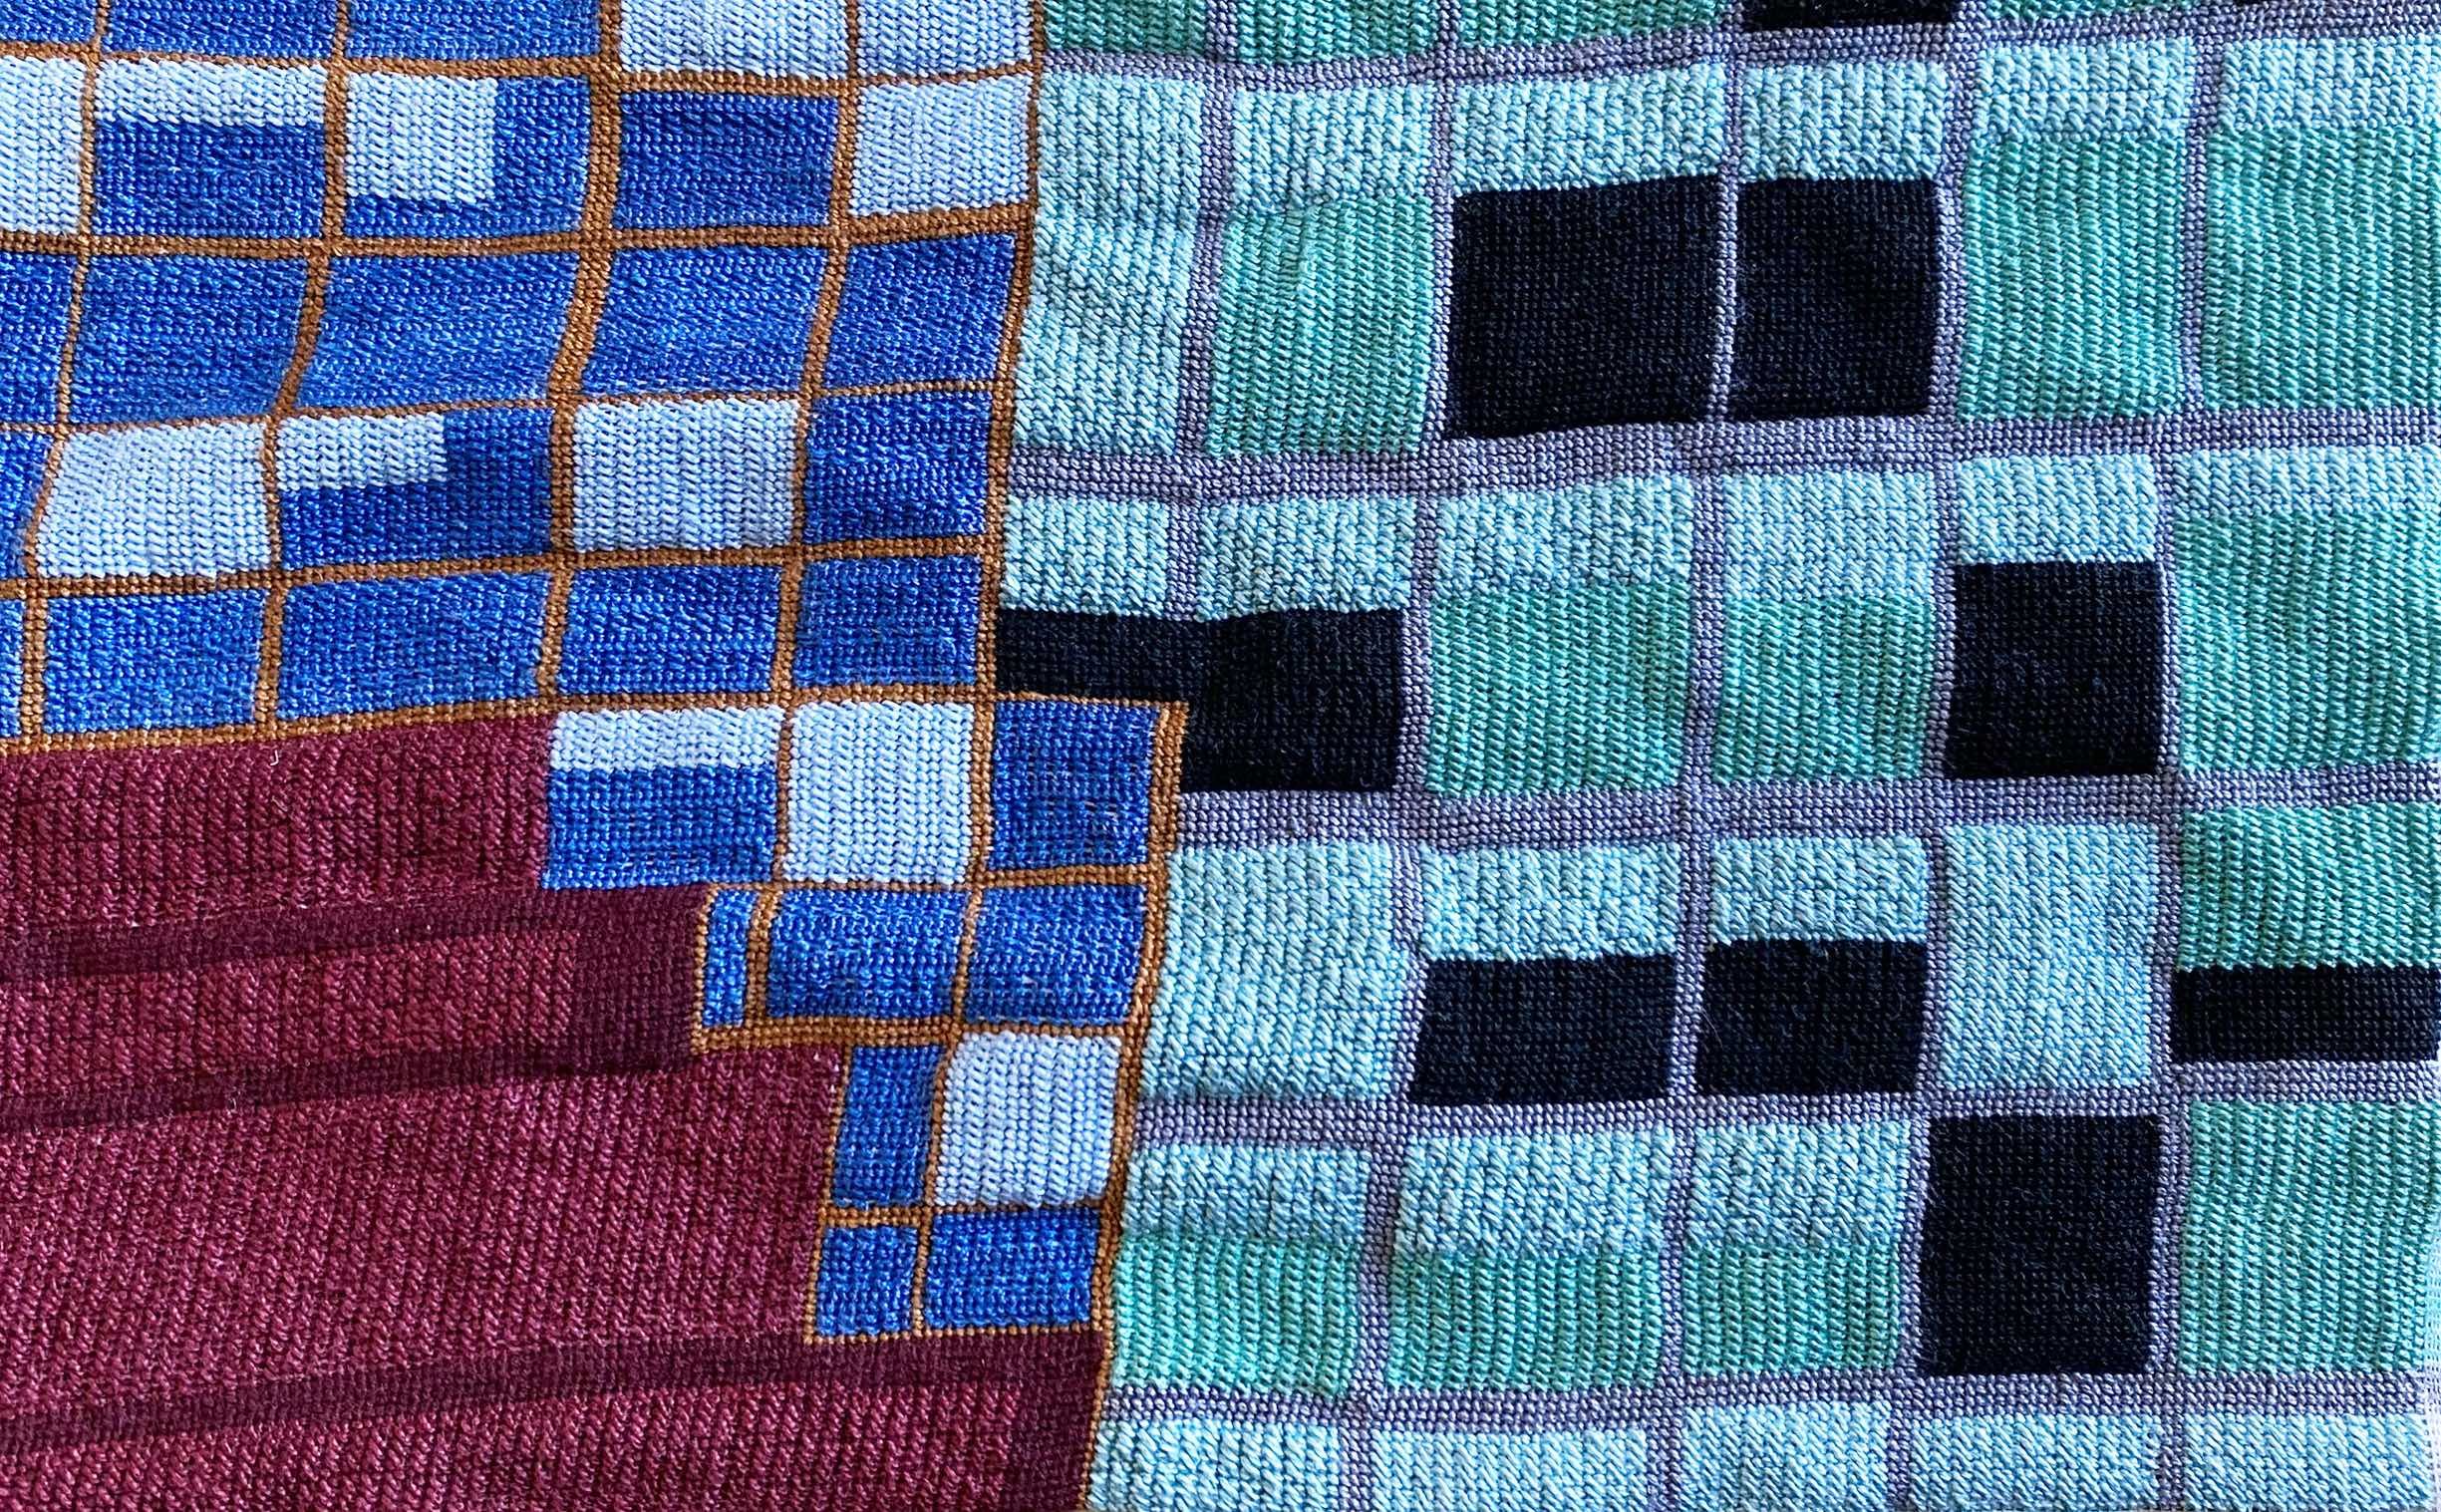 City Needlepoint series, Building Density, Red-Mint-Blue 2022, 15 x 12 inches